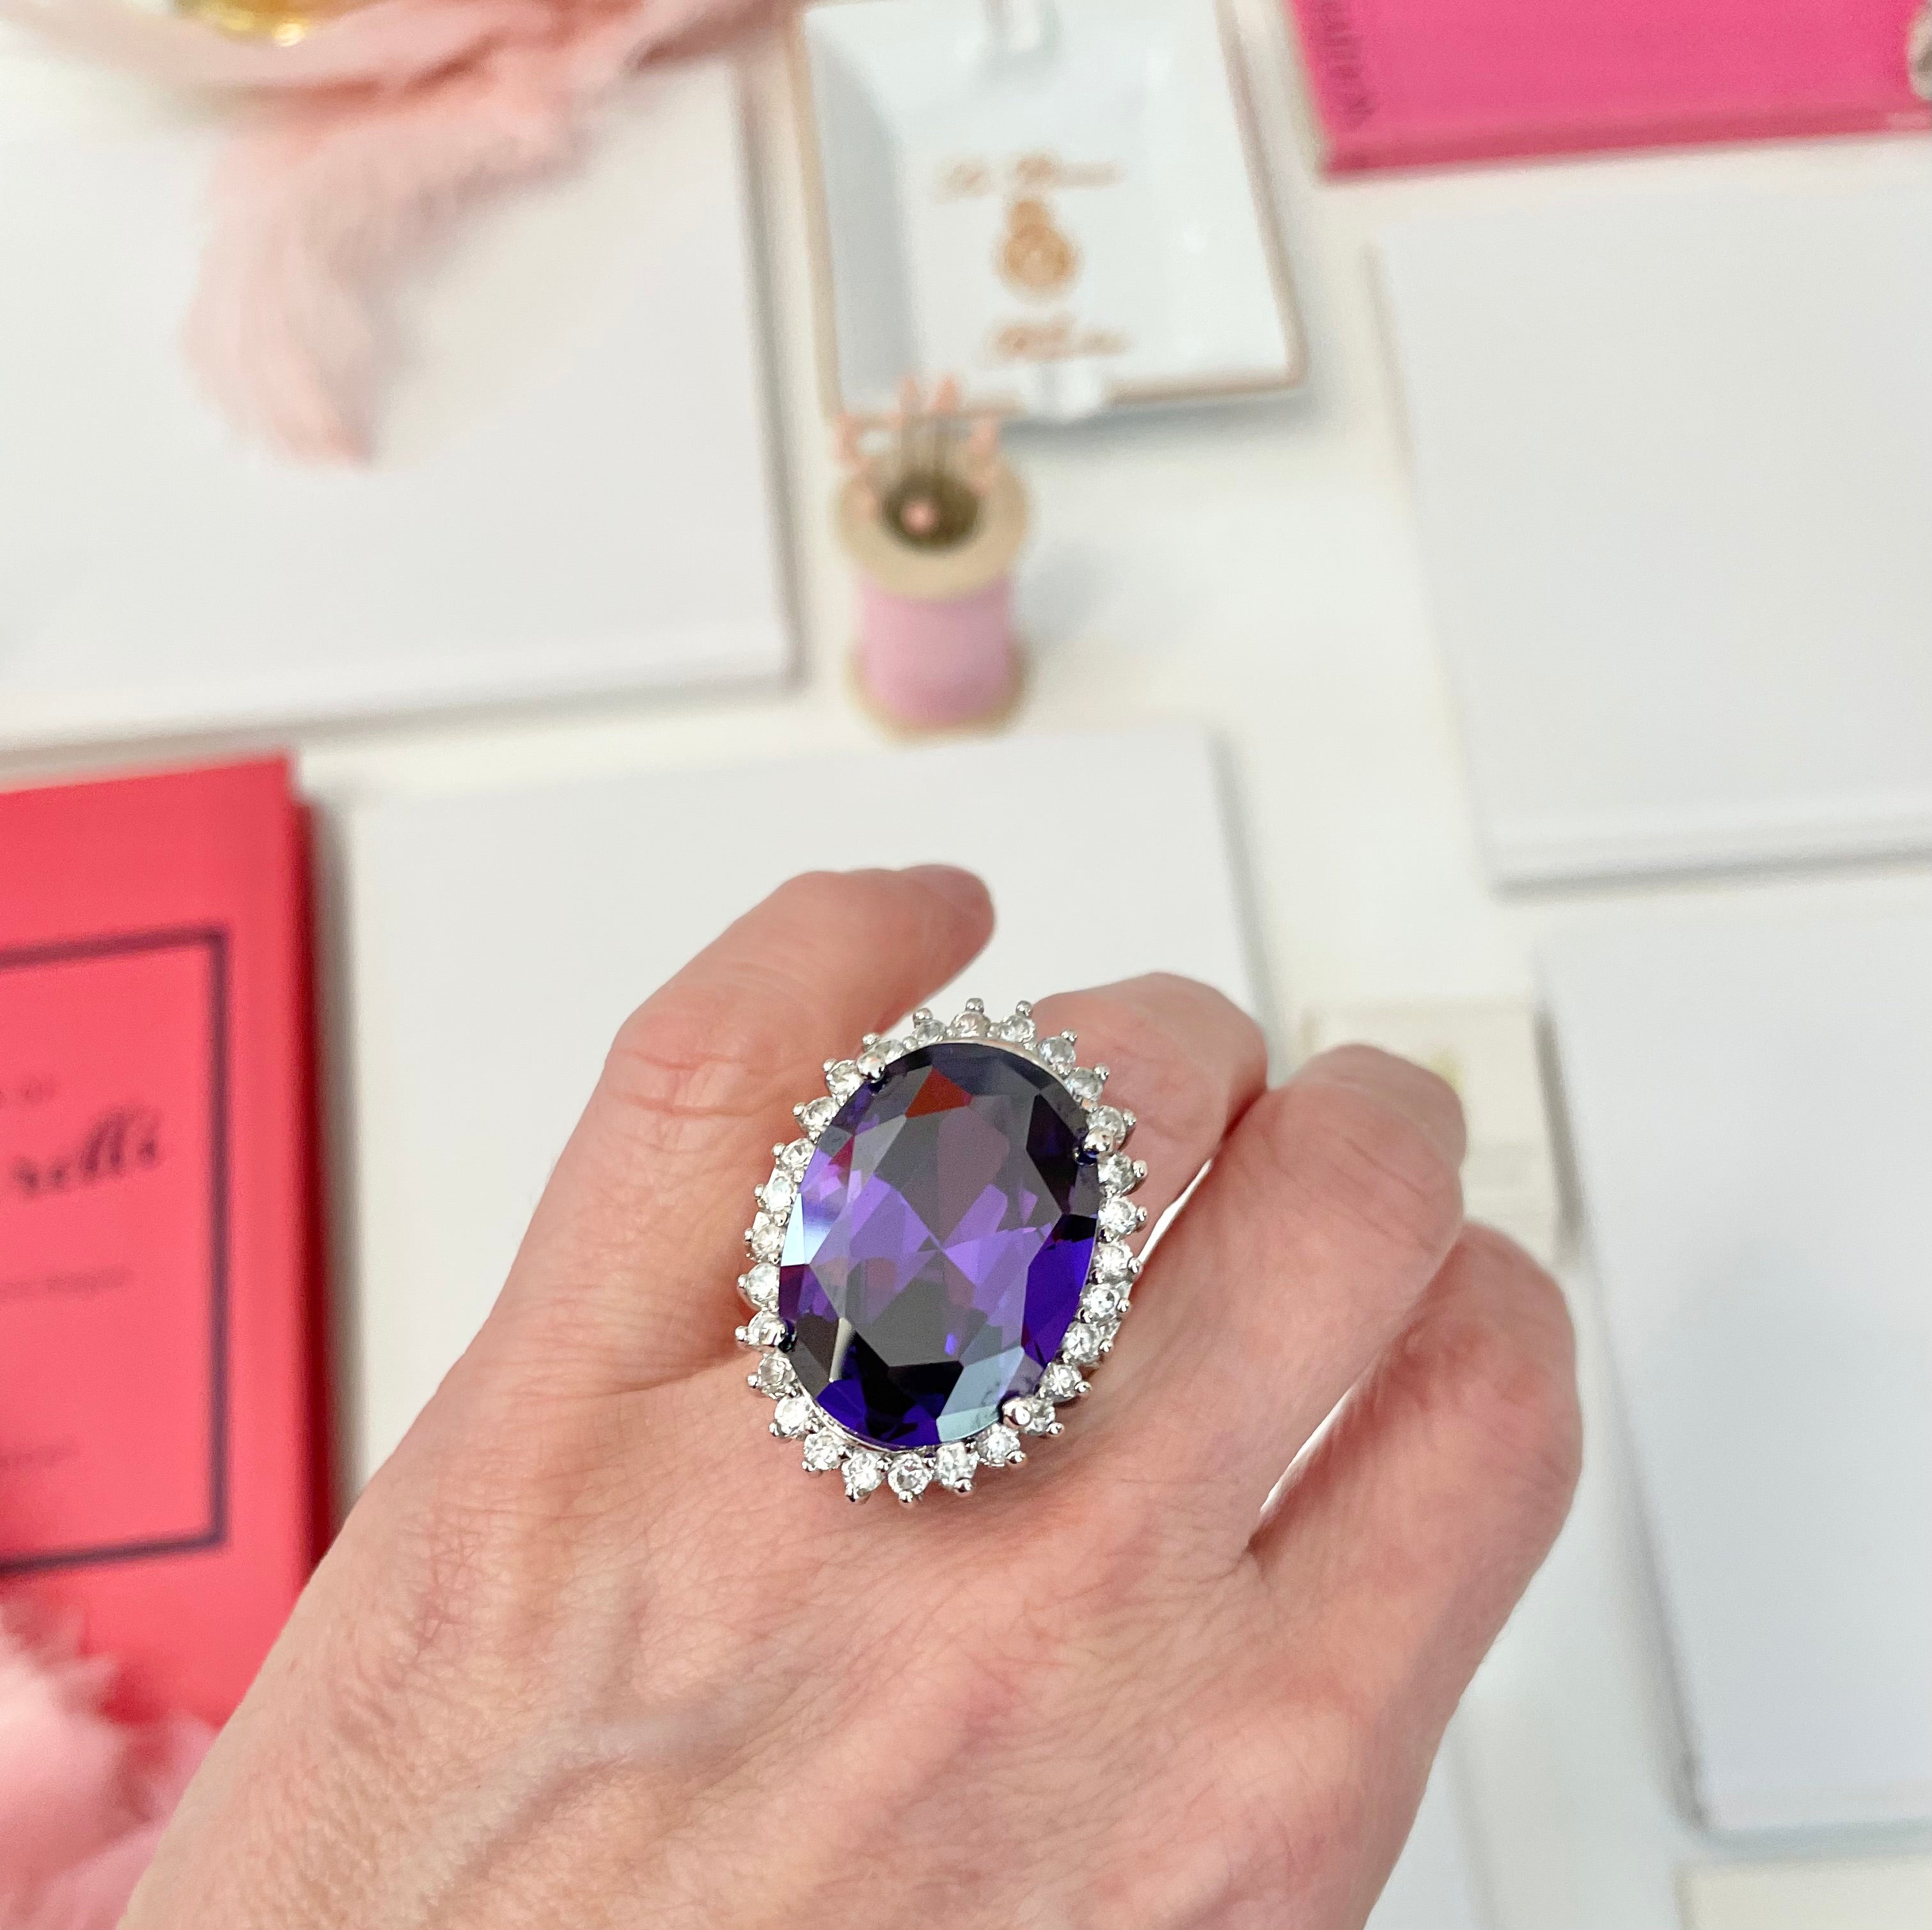 Stunning 1970's showstopper purple glass cocktail ring!